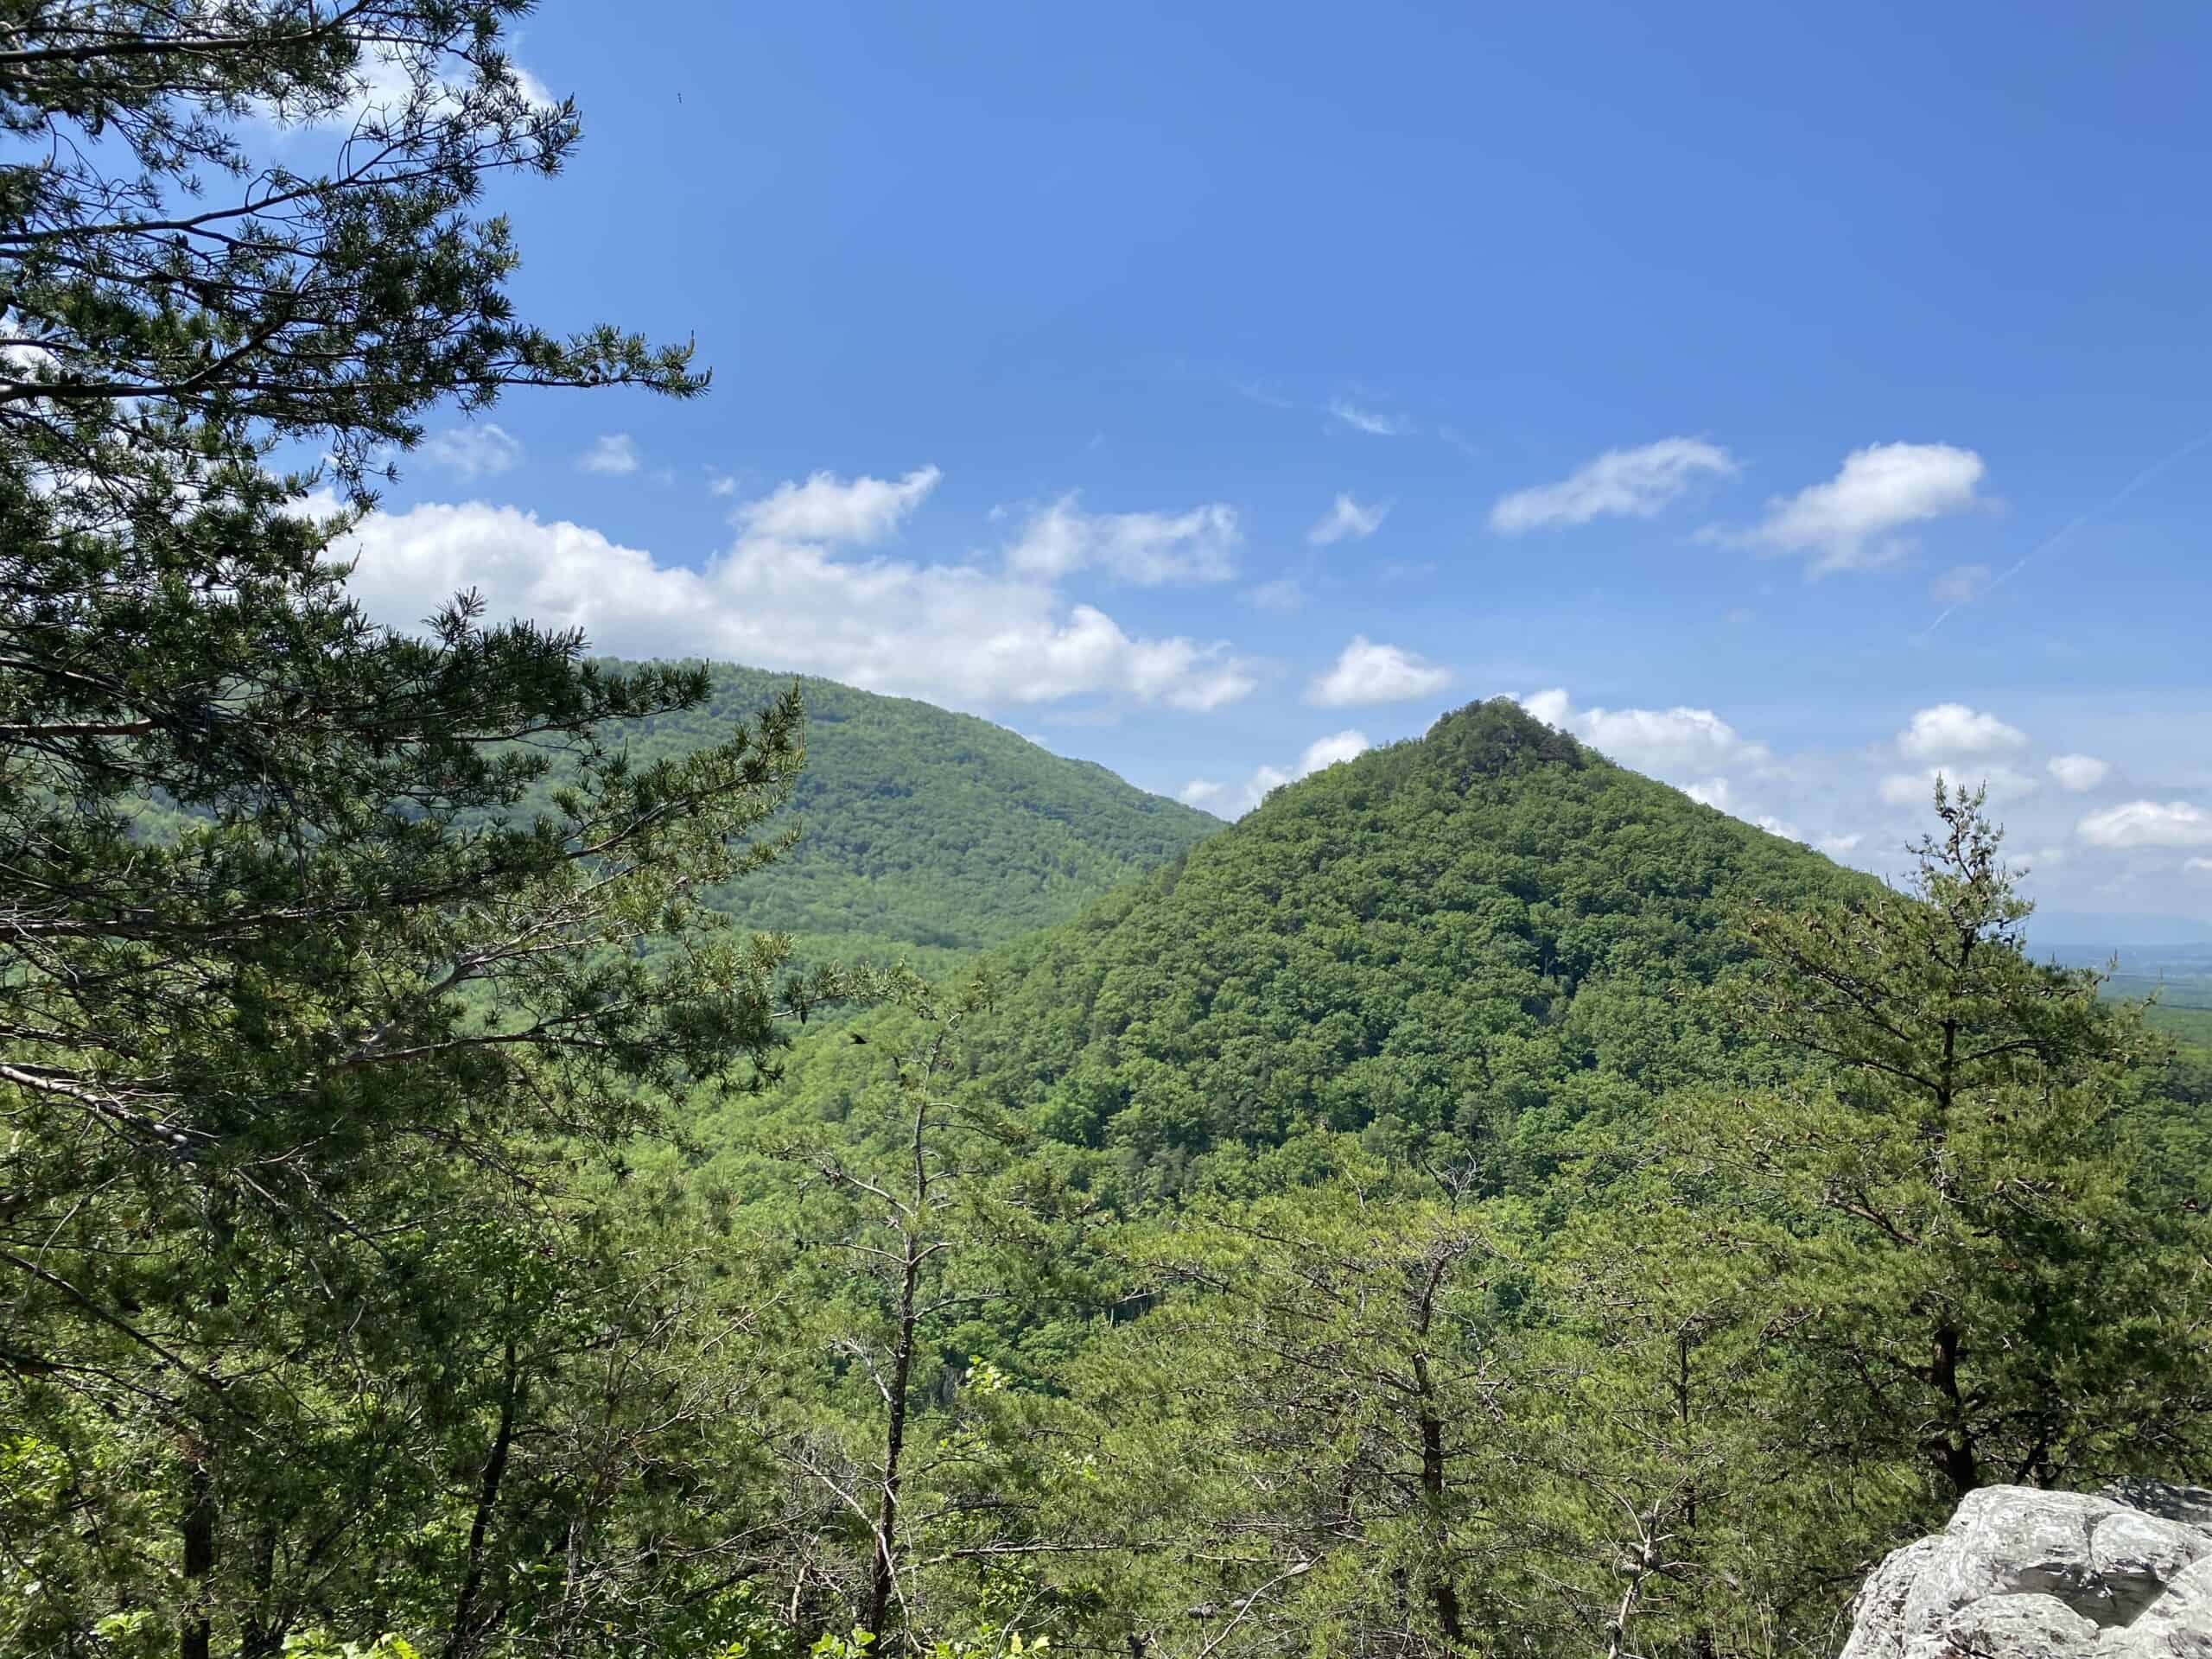 Exploring Central Virginia and its Hiking Trails